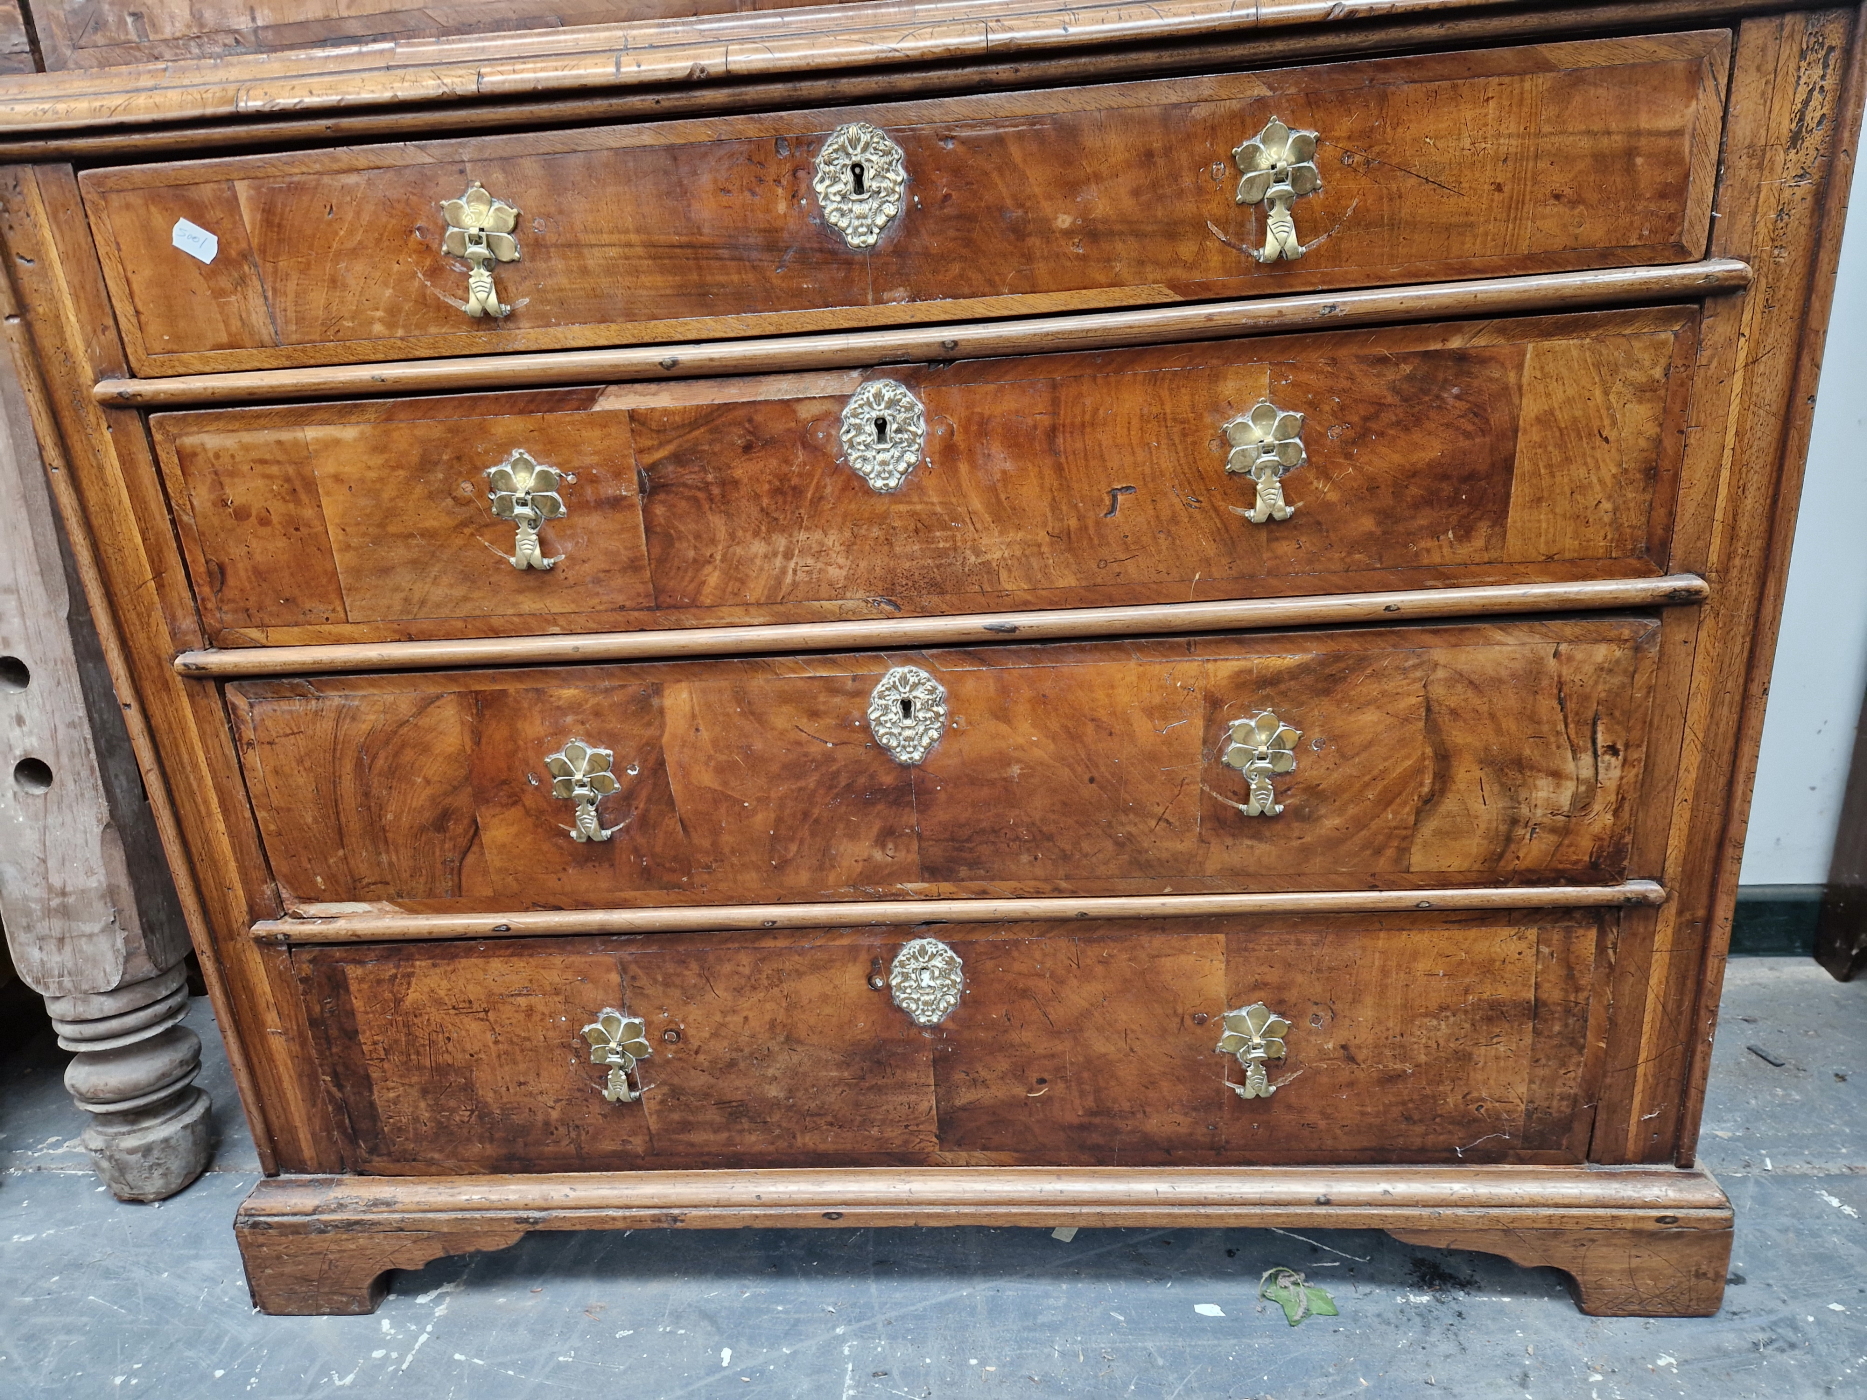 AN EARLY 18th C. WALNUT DROP FRONT BUREAU CHEST, AN OVOLO FRONT DRAWER ABOVE THE FALL, THE BASE WITH - Image 2 of 9